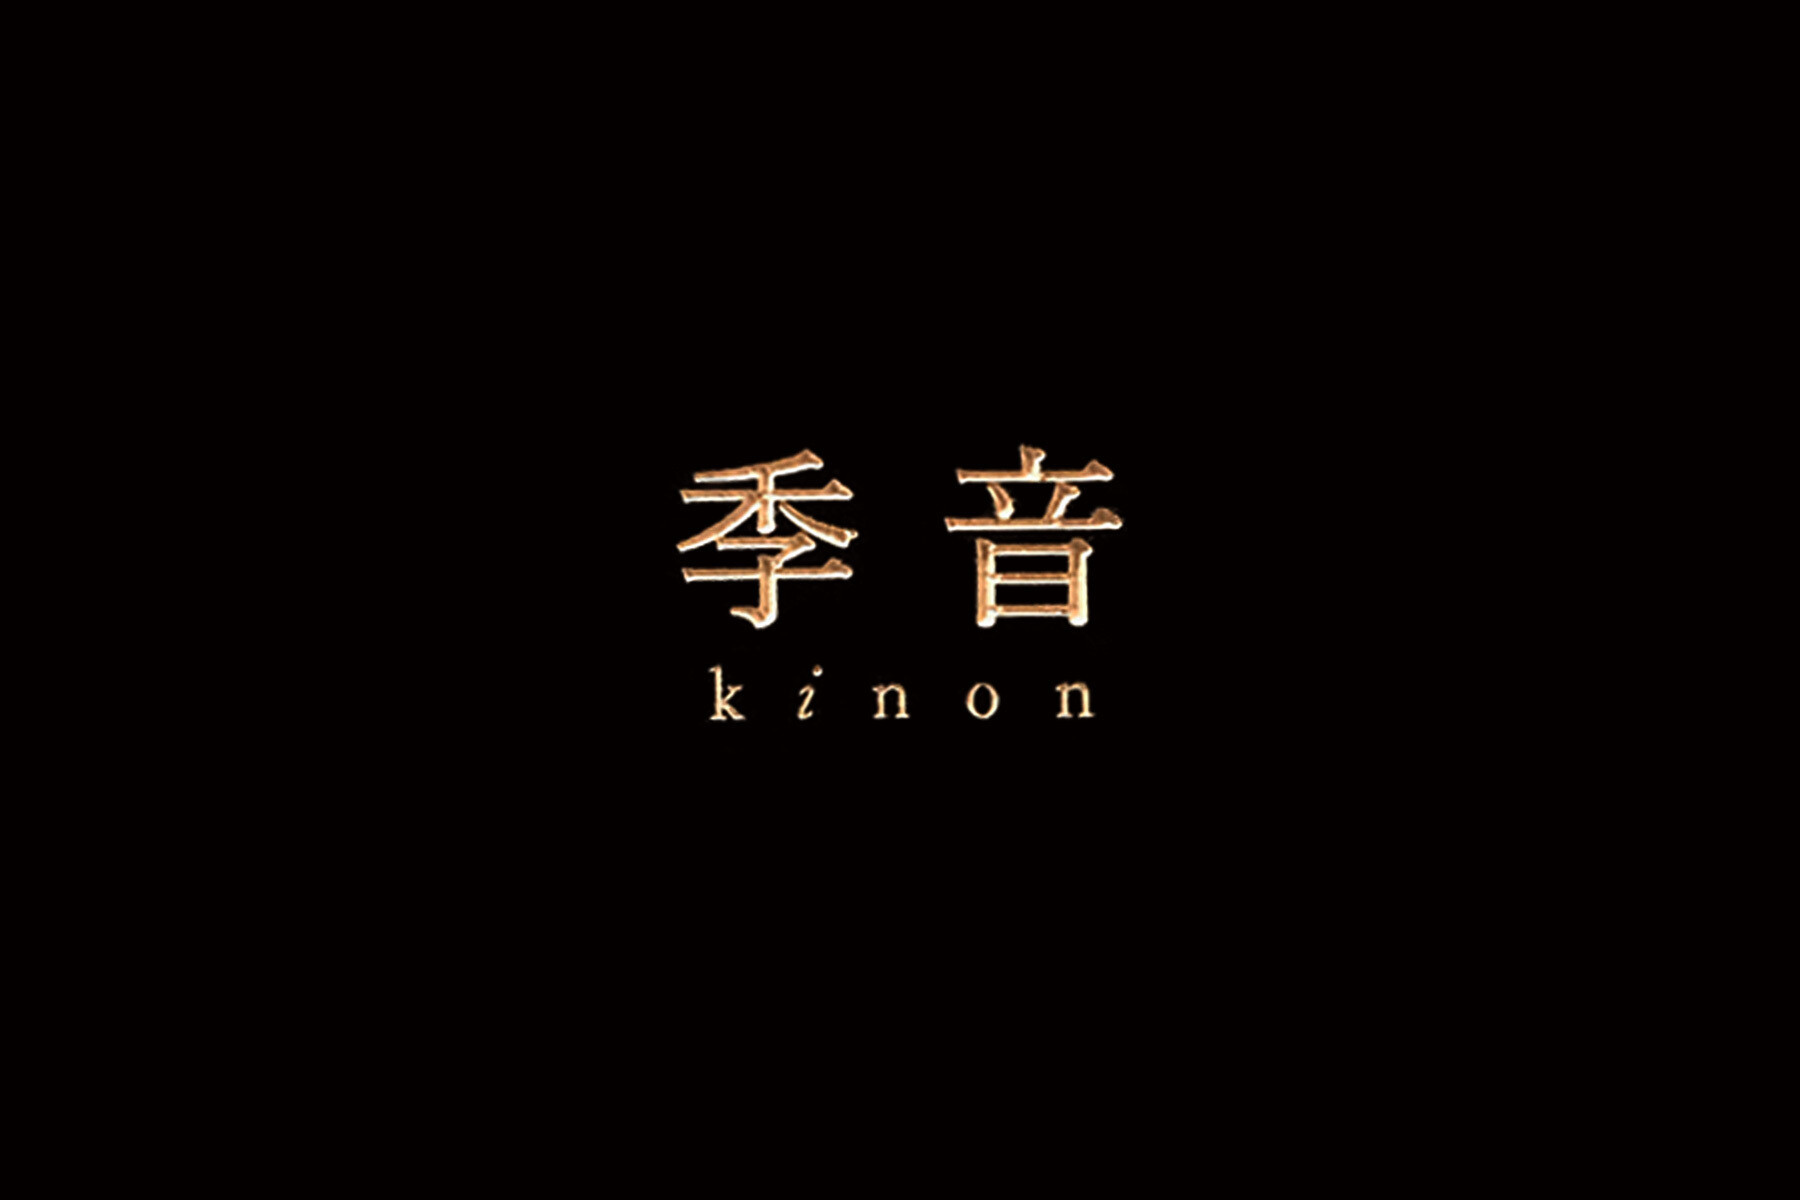 Kinon's images4